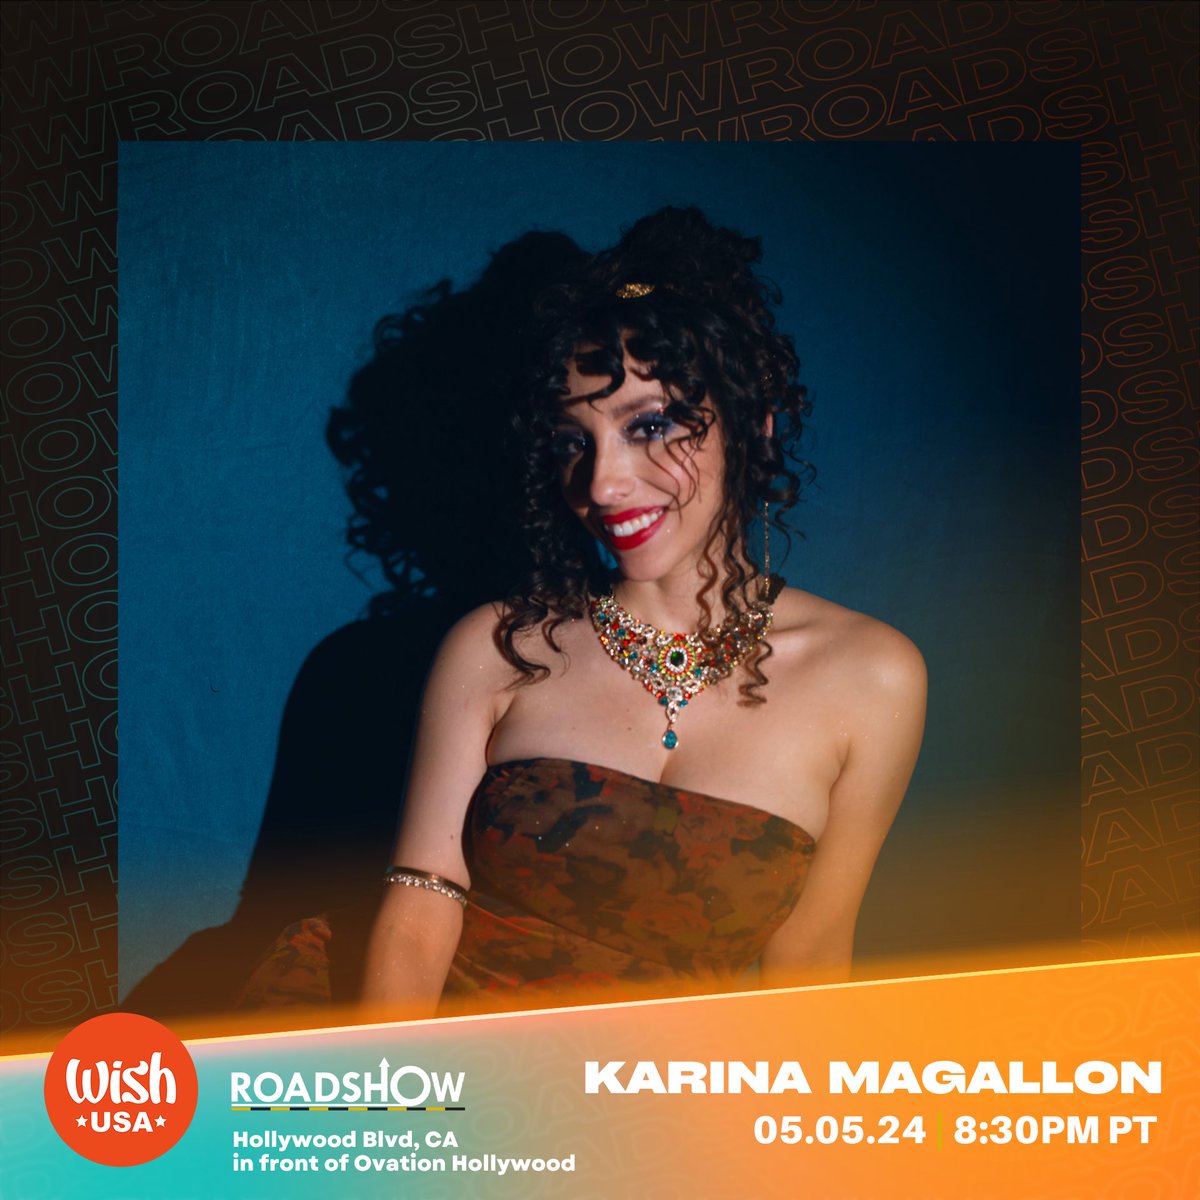 Karina Magallon’s got the stage at 8:30pm! 🎤🎶 Head over to the front of Ovation Hollywood for some soulful vibes this Sunday! 🎉 #KarinaLive

#LiveMusic #SundayFunday #ConcertVibes #KarinaFans #MusicIsLife #HollywoodLive #TuneIn #SoulfulSunday #MusicLovers #PopCulture #Live